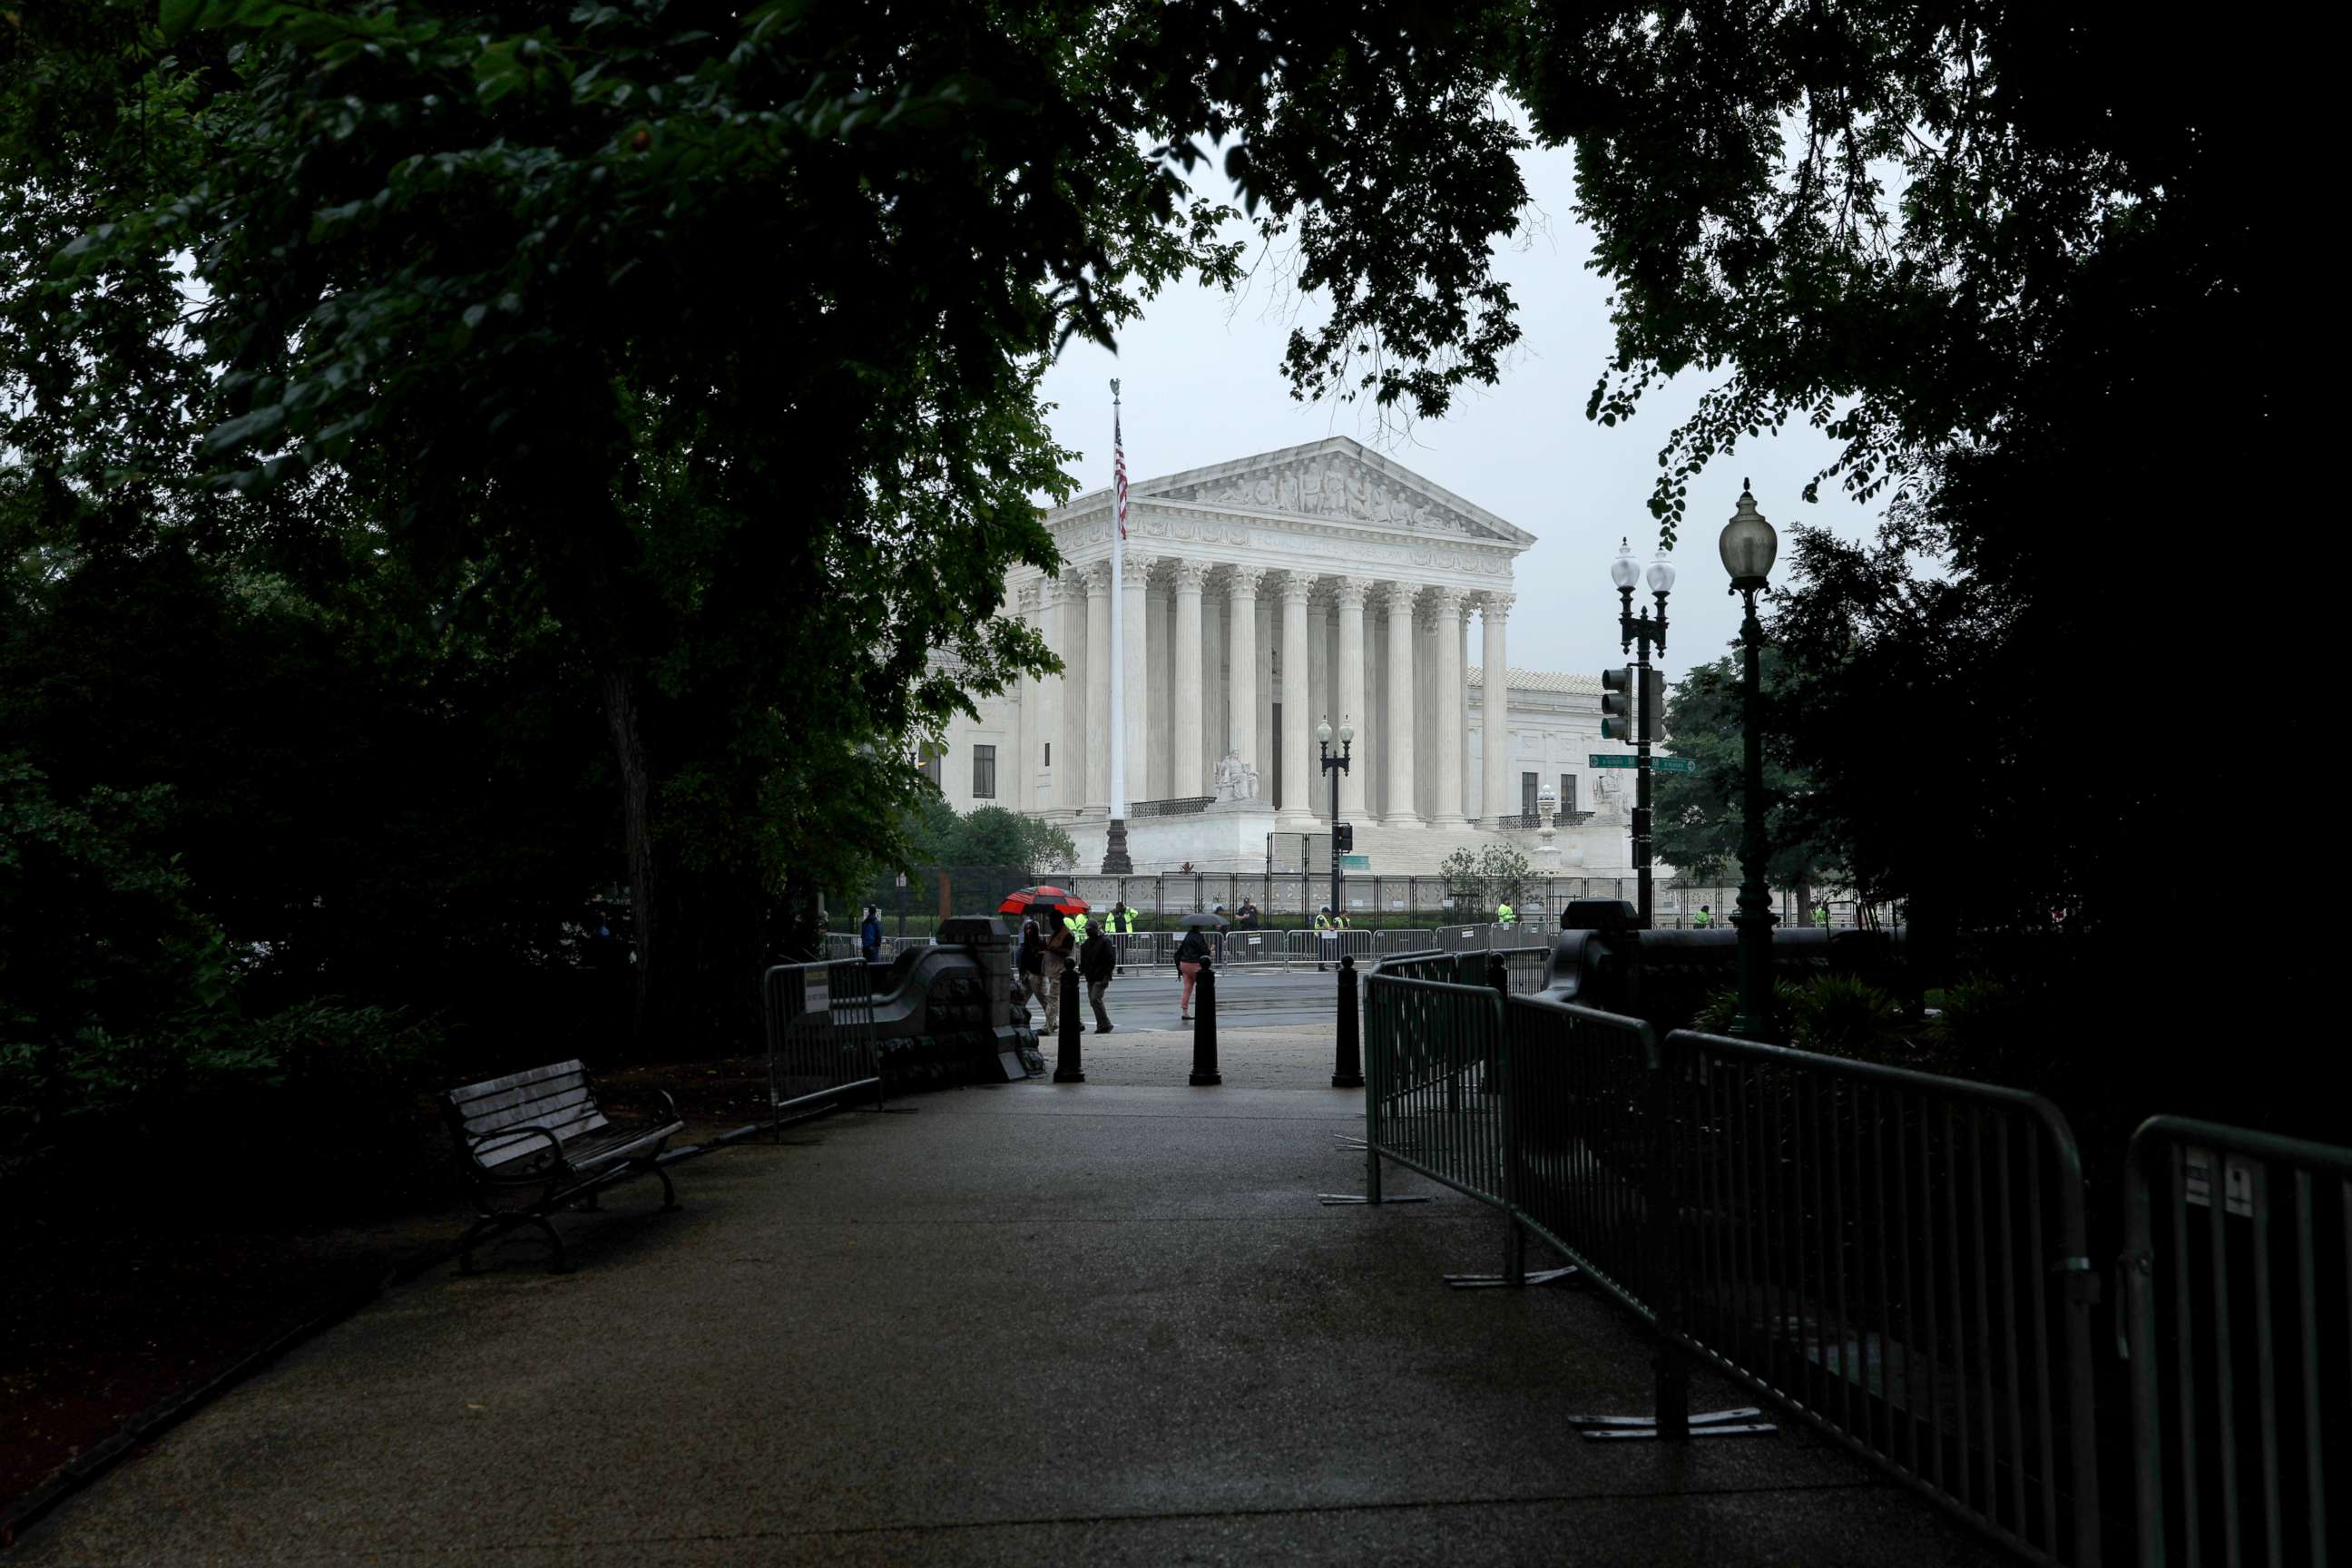 PHOTO: A view of the U.S. Supreme Court Building on June 23, 2022 in Washington, DC.